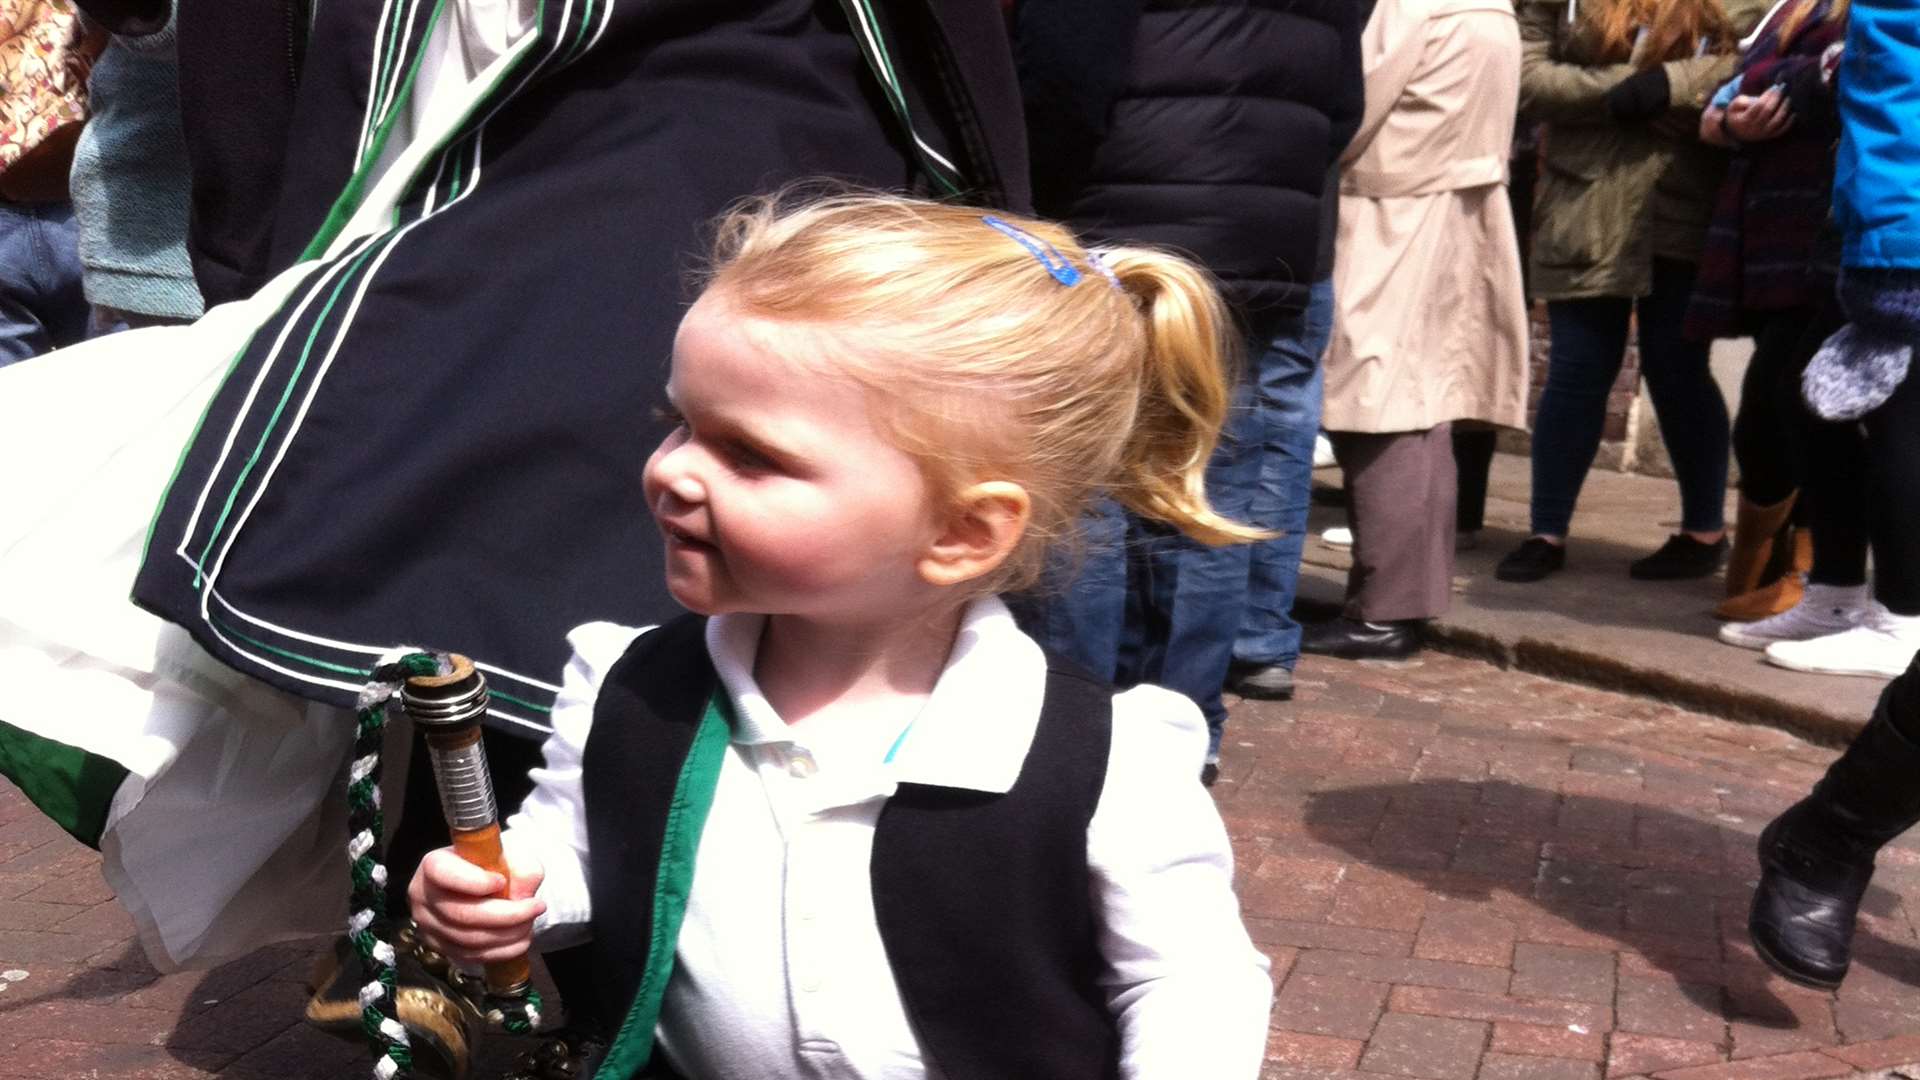 Phoebe Janes, two, has fun at the festival